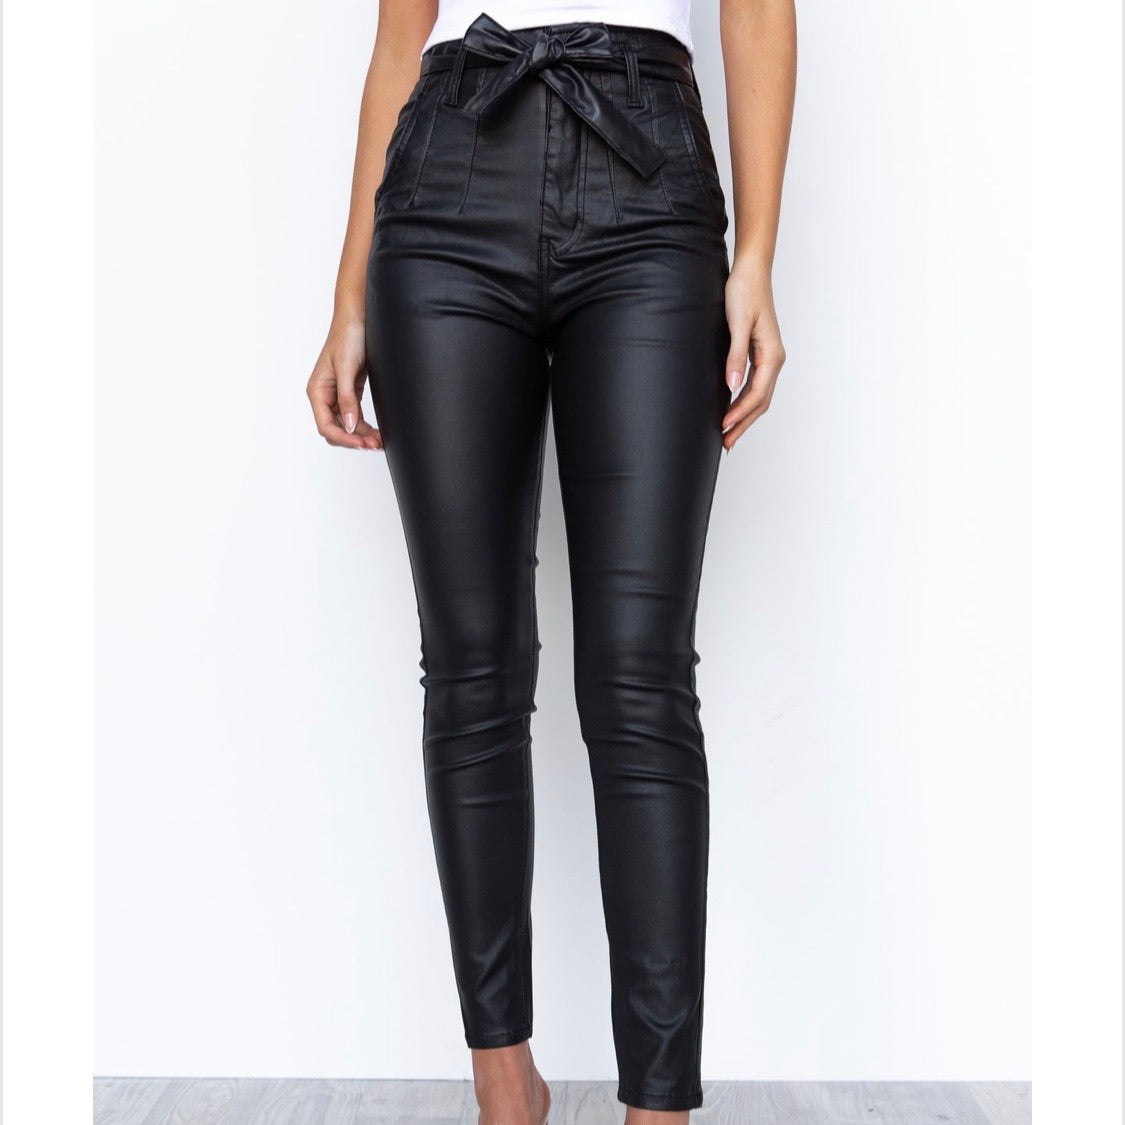 High Waisted Tie up Jeans - Black Leather look